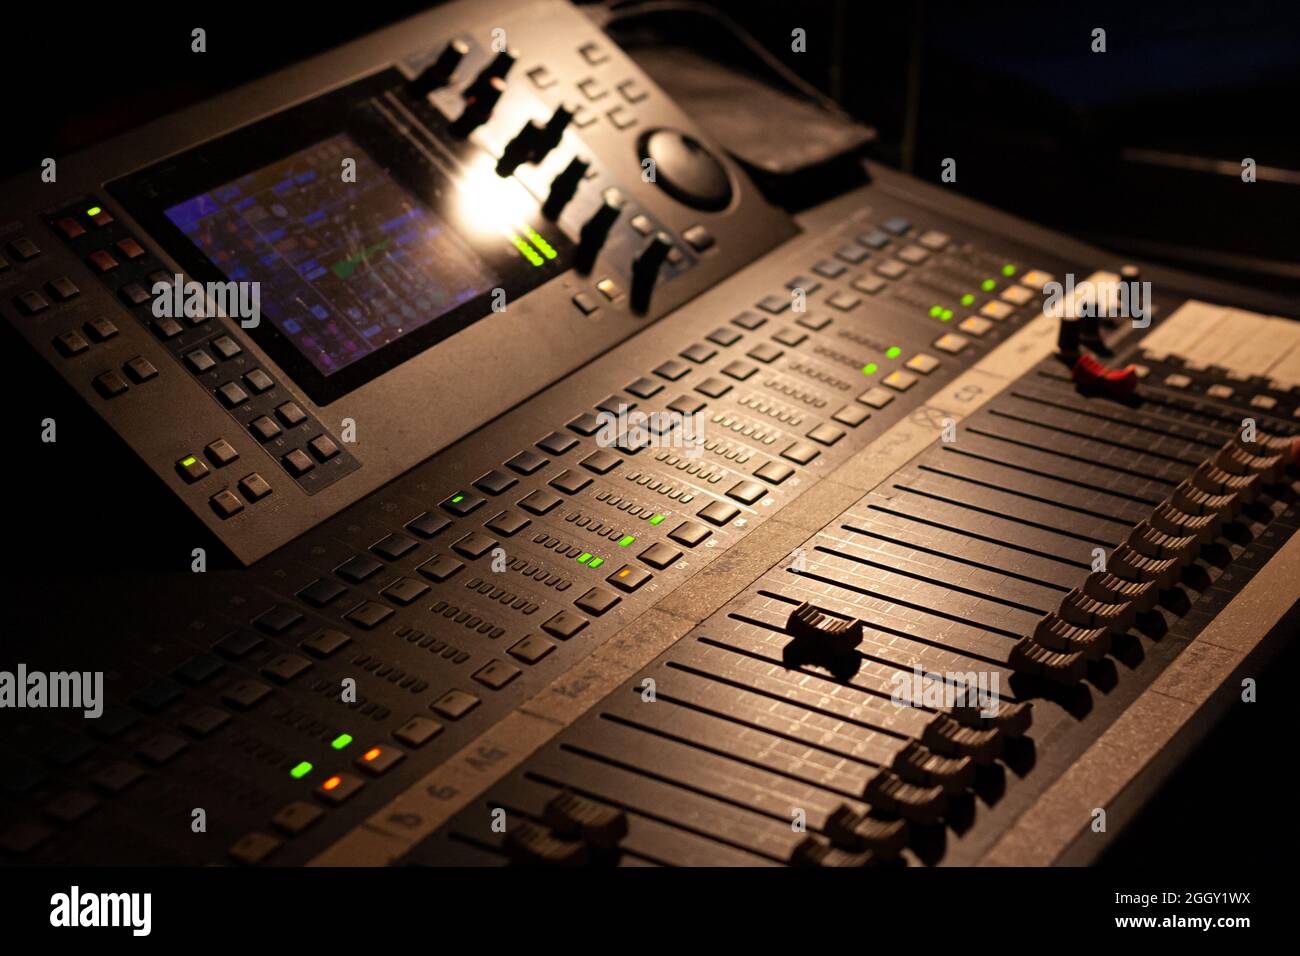 ambient shoot of a modern digital audio mixing device for professional sound mixing at a concert venue in dim partial lighting Stock Photo